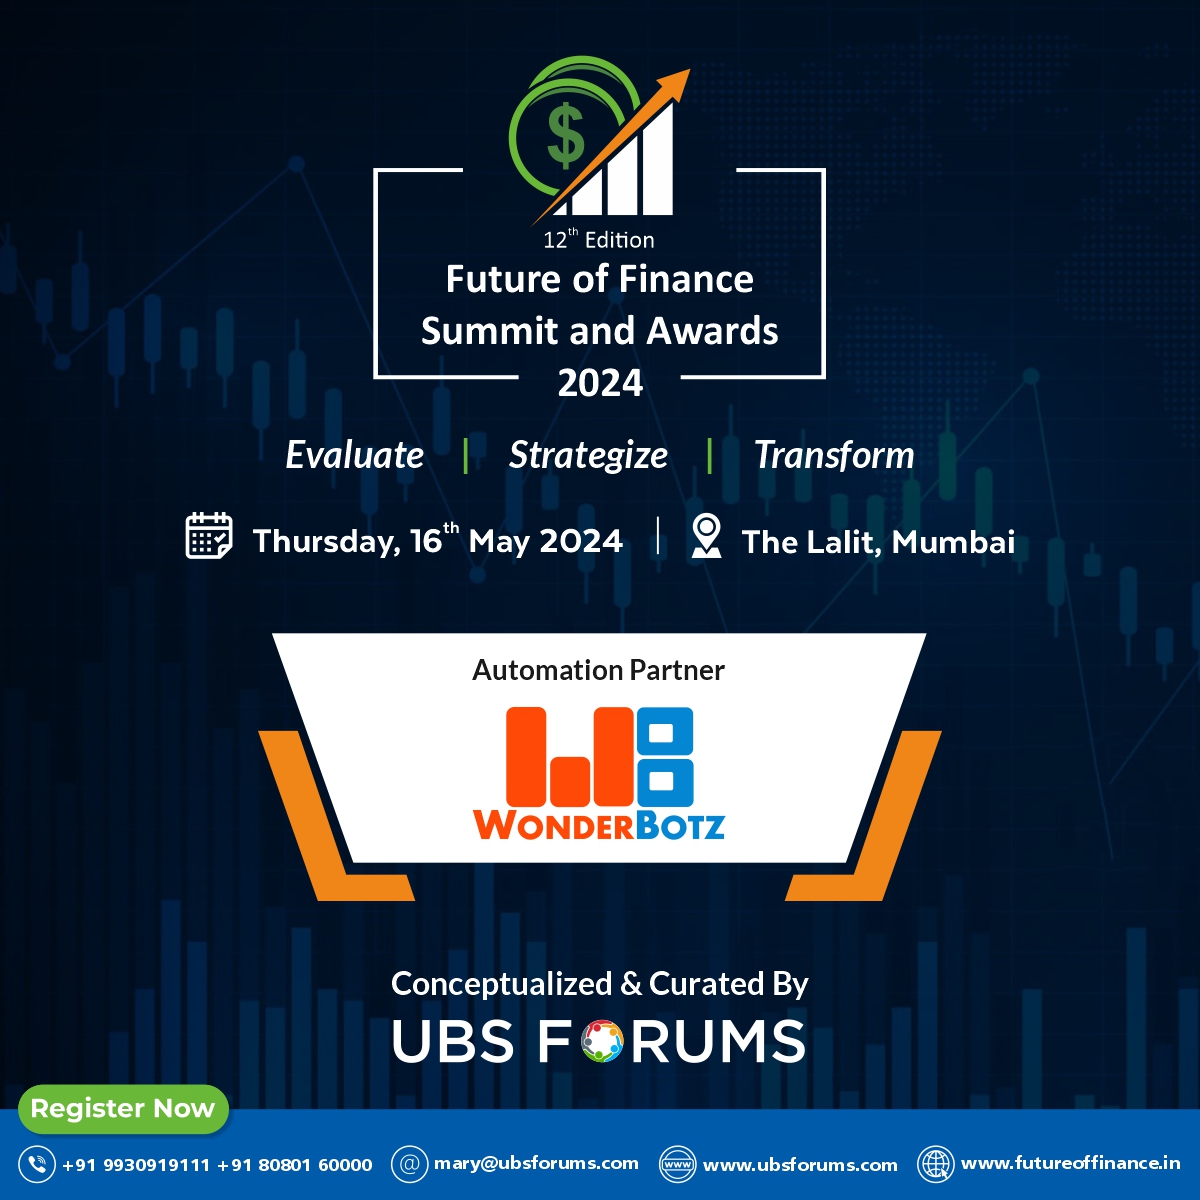 We are thrilled to welcome on-board @WonderBotz as our Official 'Automation Partner' for our Strategic '12th Edition Future of Finance Summit & Awards 2024.' 🗓️ Date: Thursday 16th May 📍 Venue: The Lalit Mumbai Register Now - shorturl.at/pET79 #UBSFFOF #futureoffinance